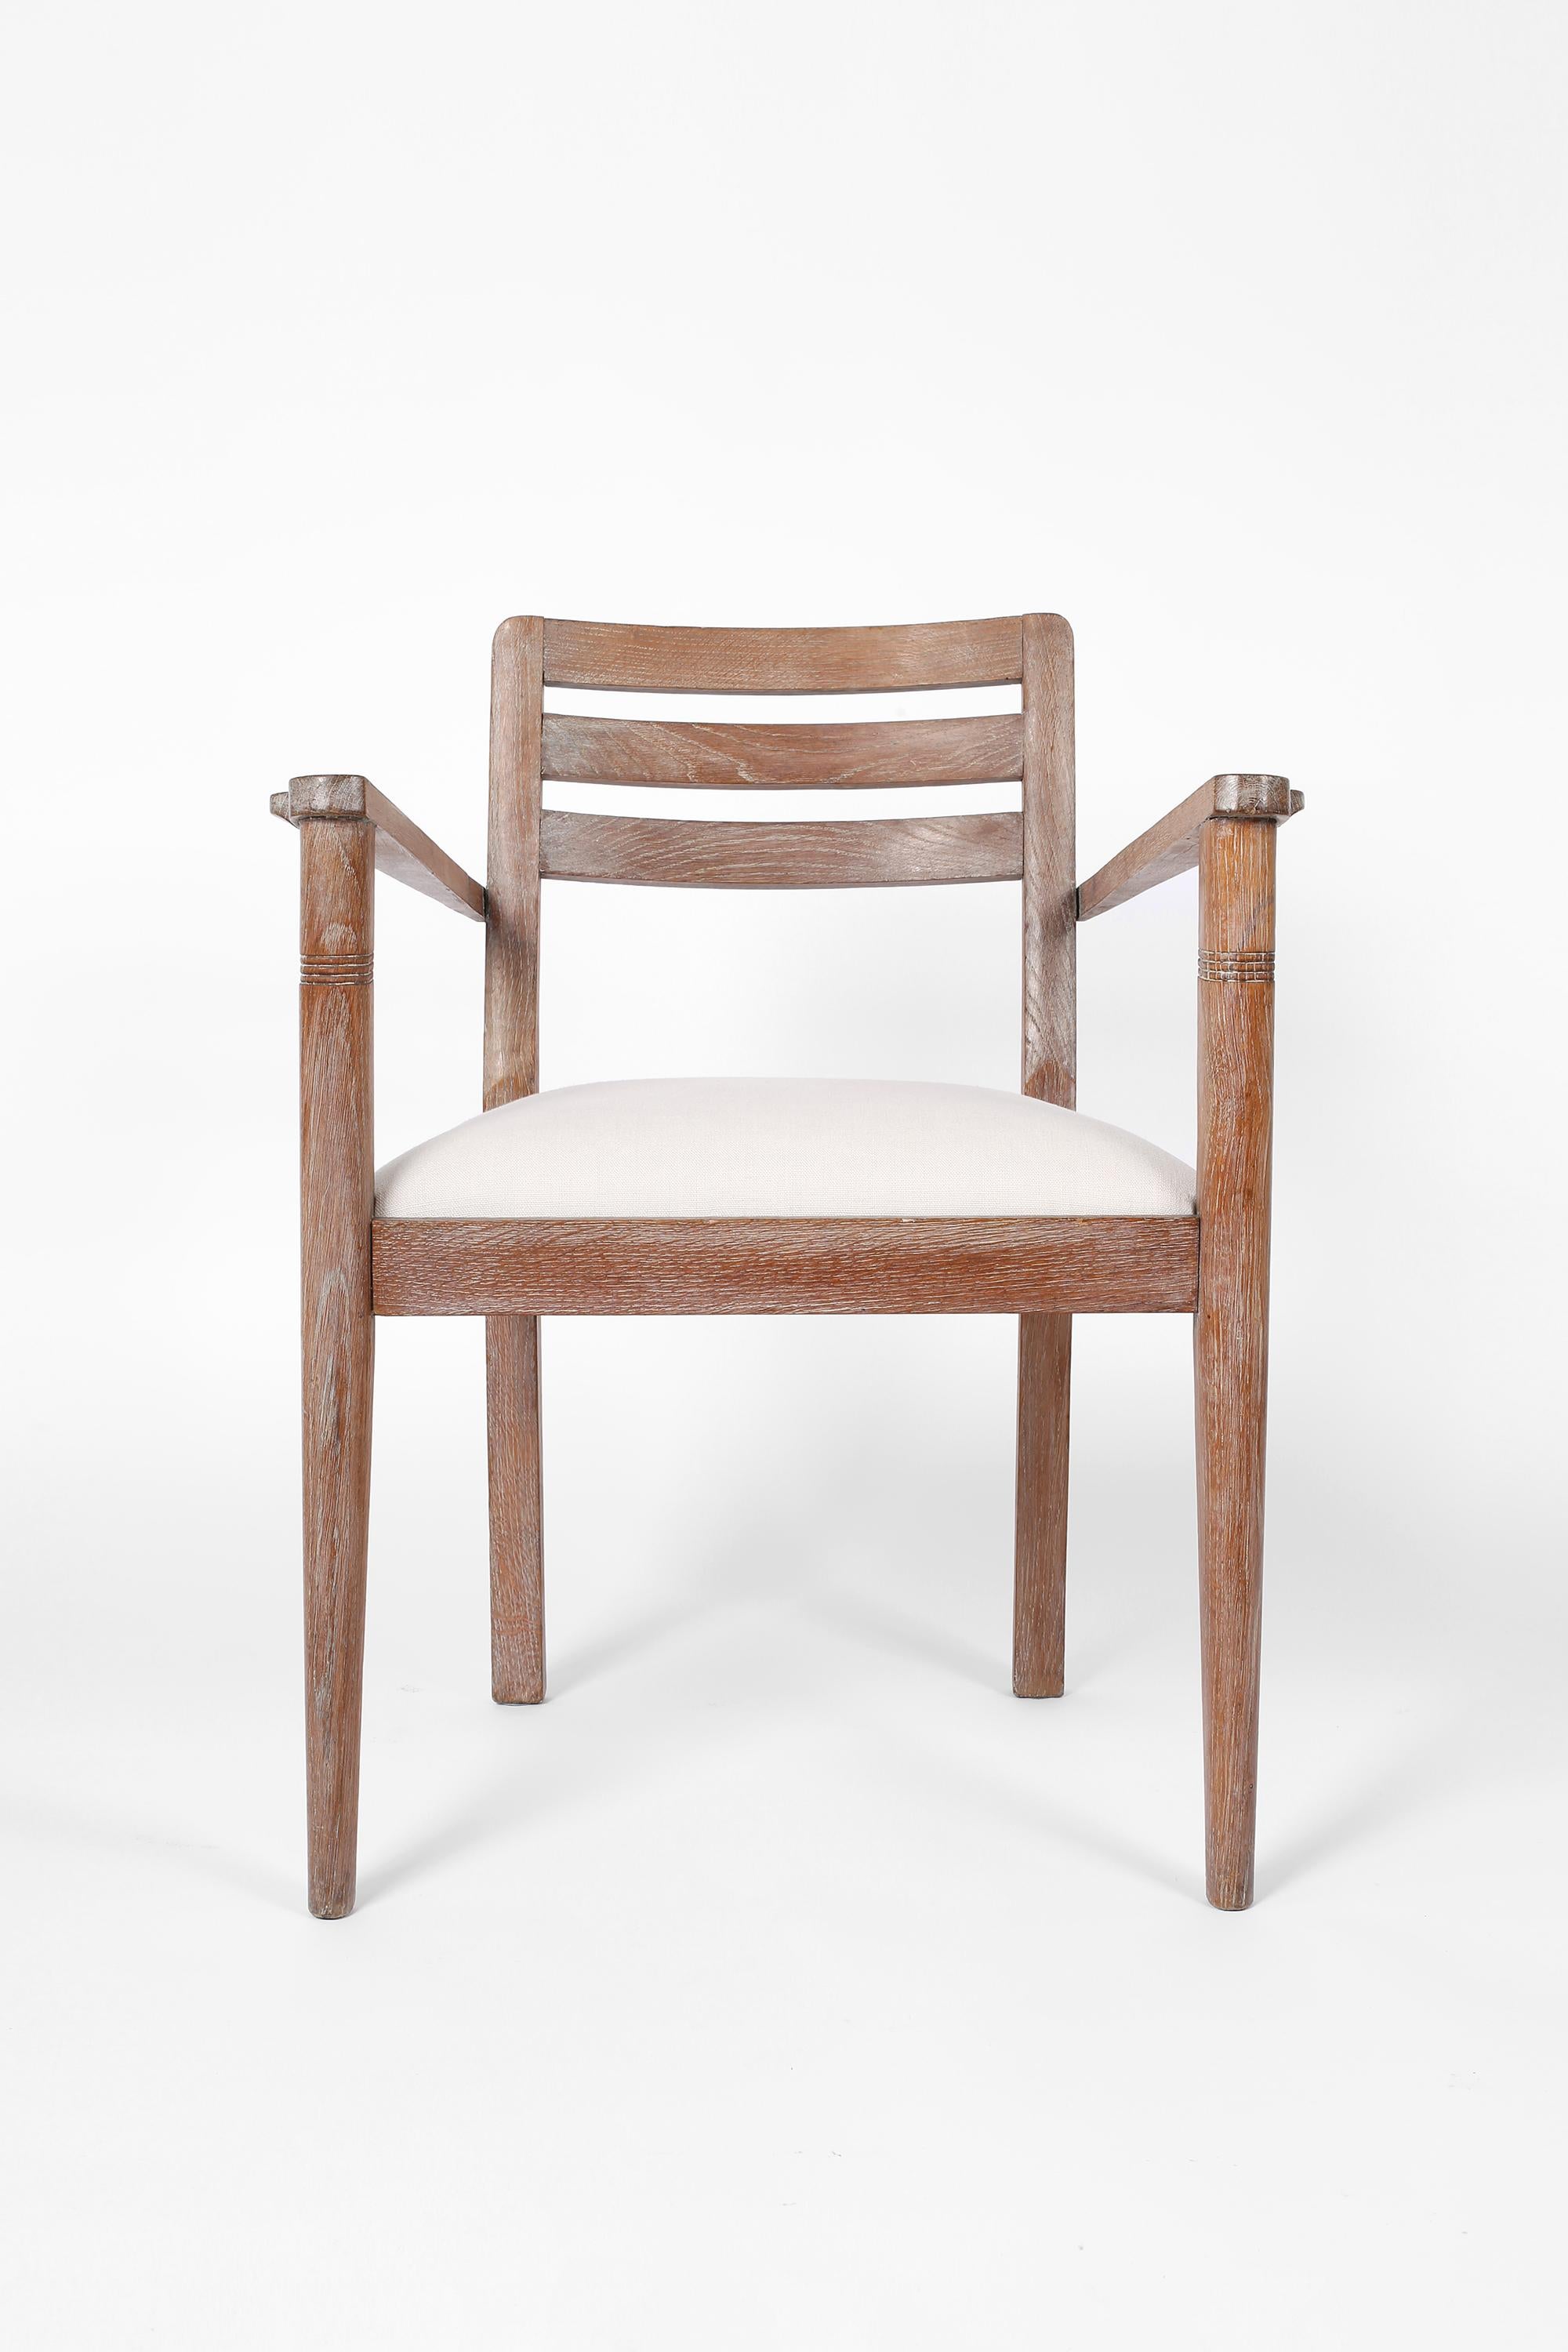 Pair of French Art Deco Limed Oak & Linen Armchairs, C. 1930s In Good Condition For Sale In London, GB